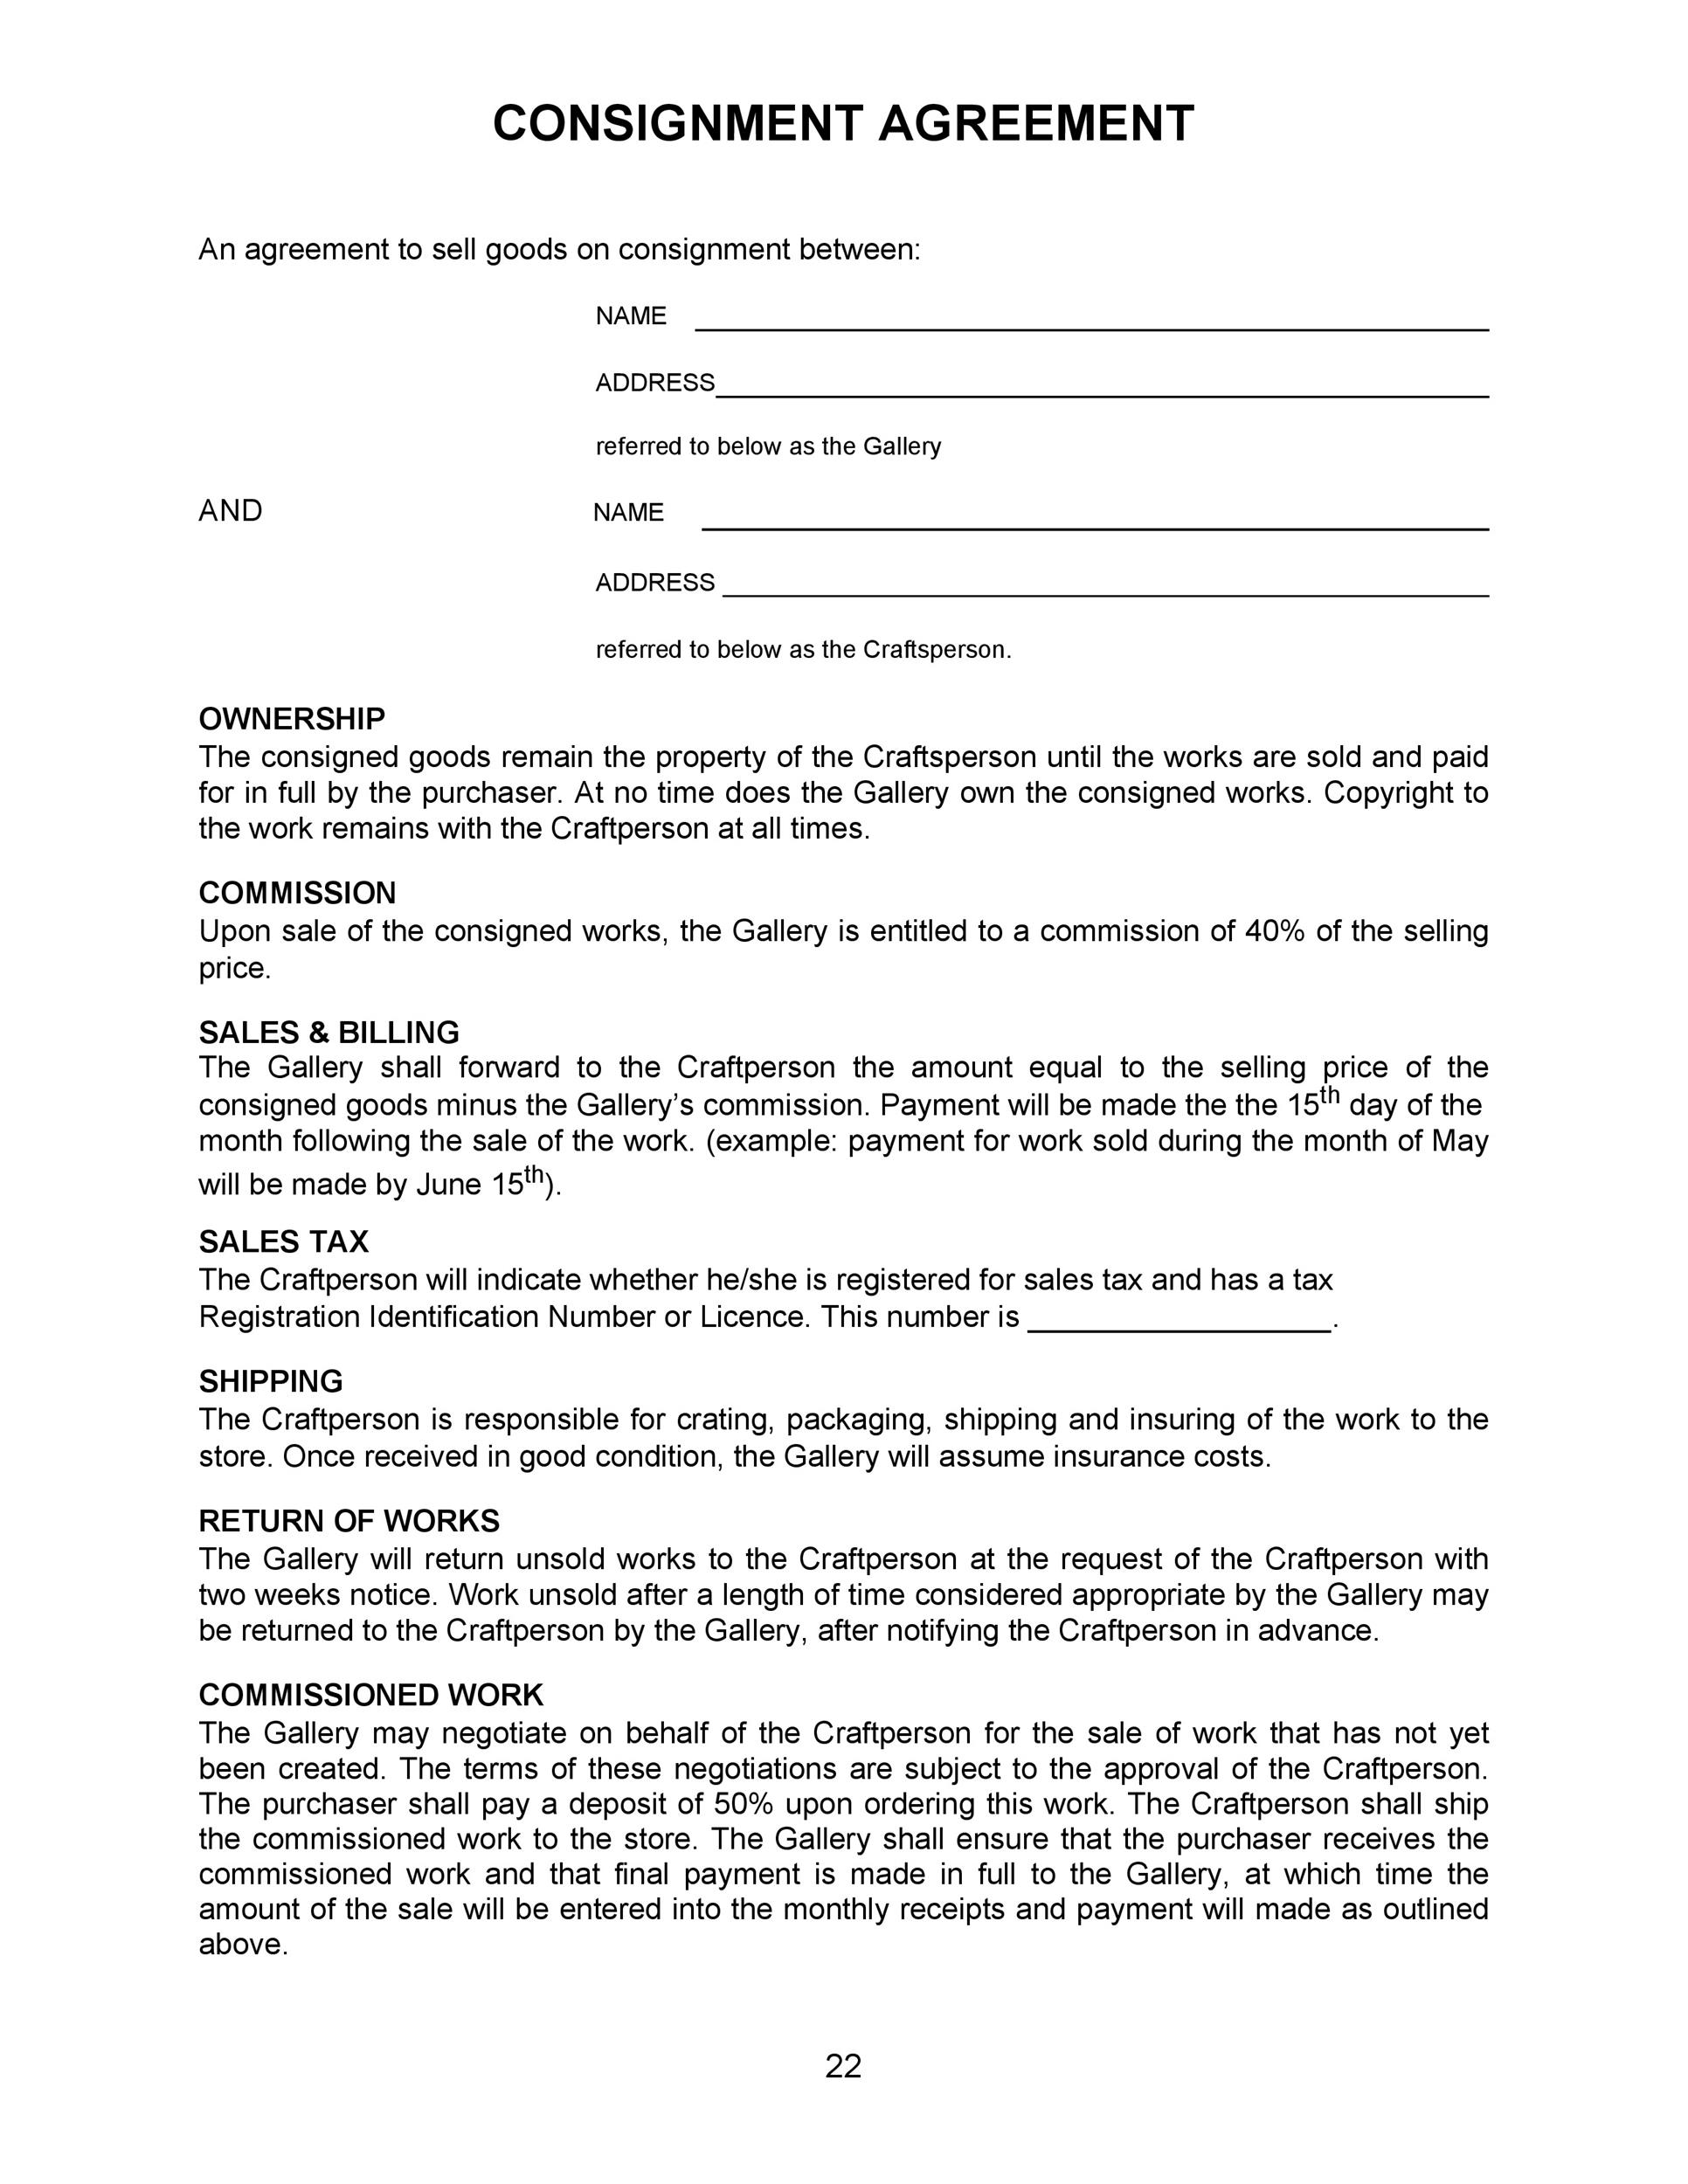 Free Consignment Agreement Template 26